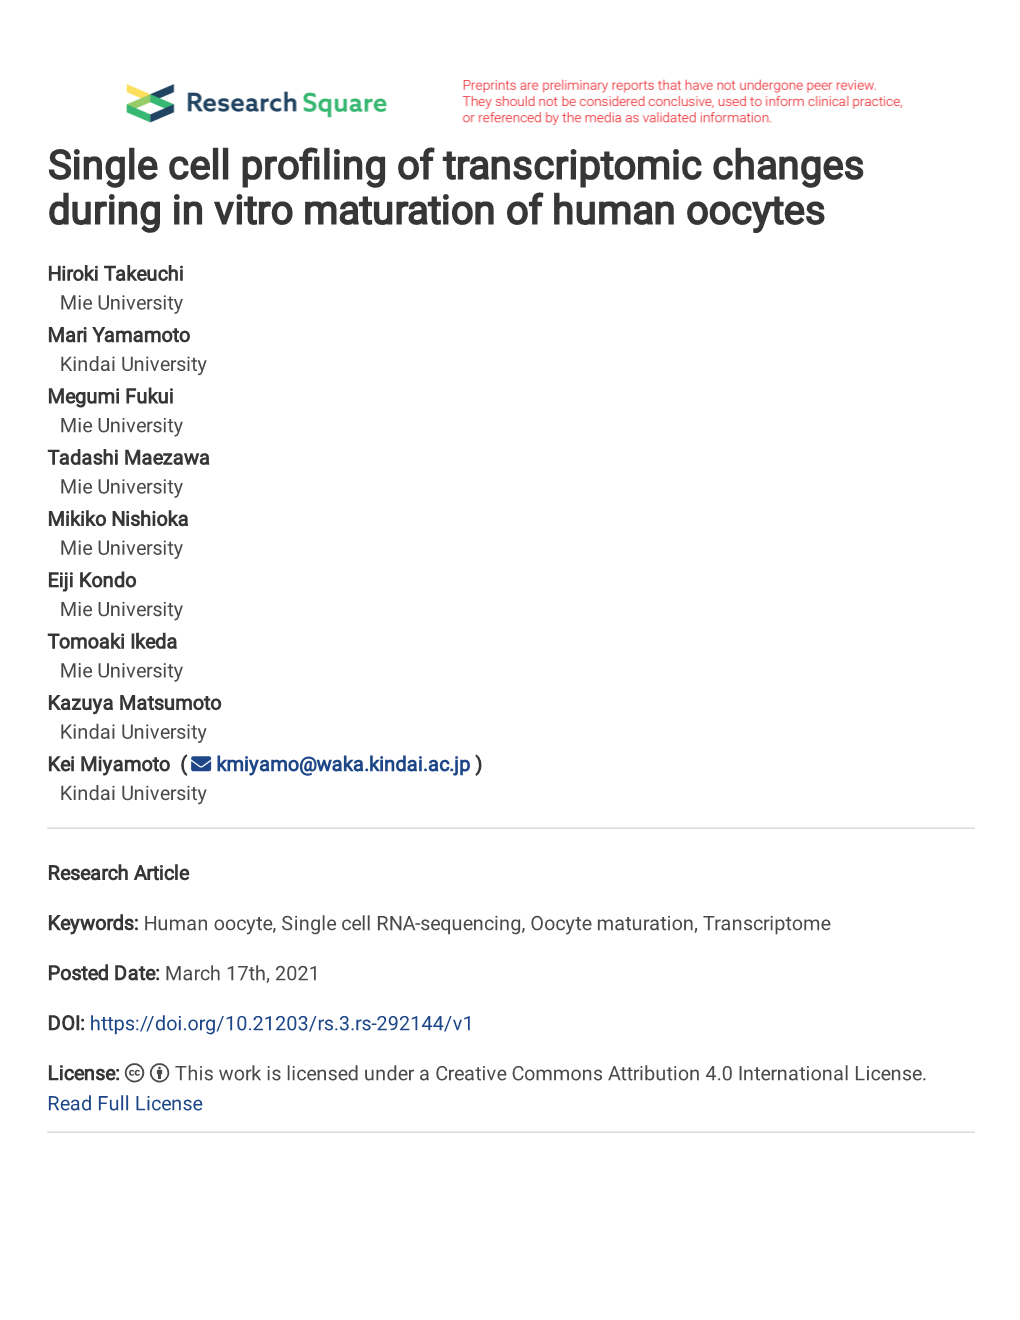 Single Cell Profiling of Transcriptomic Changes During in Vitro Maturation 3 of Human Oocytes